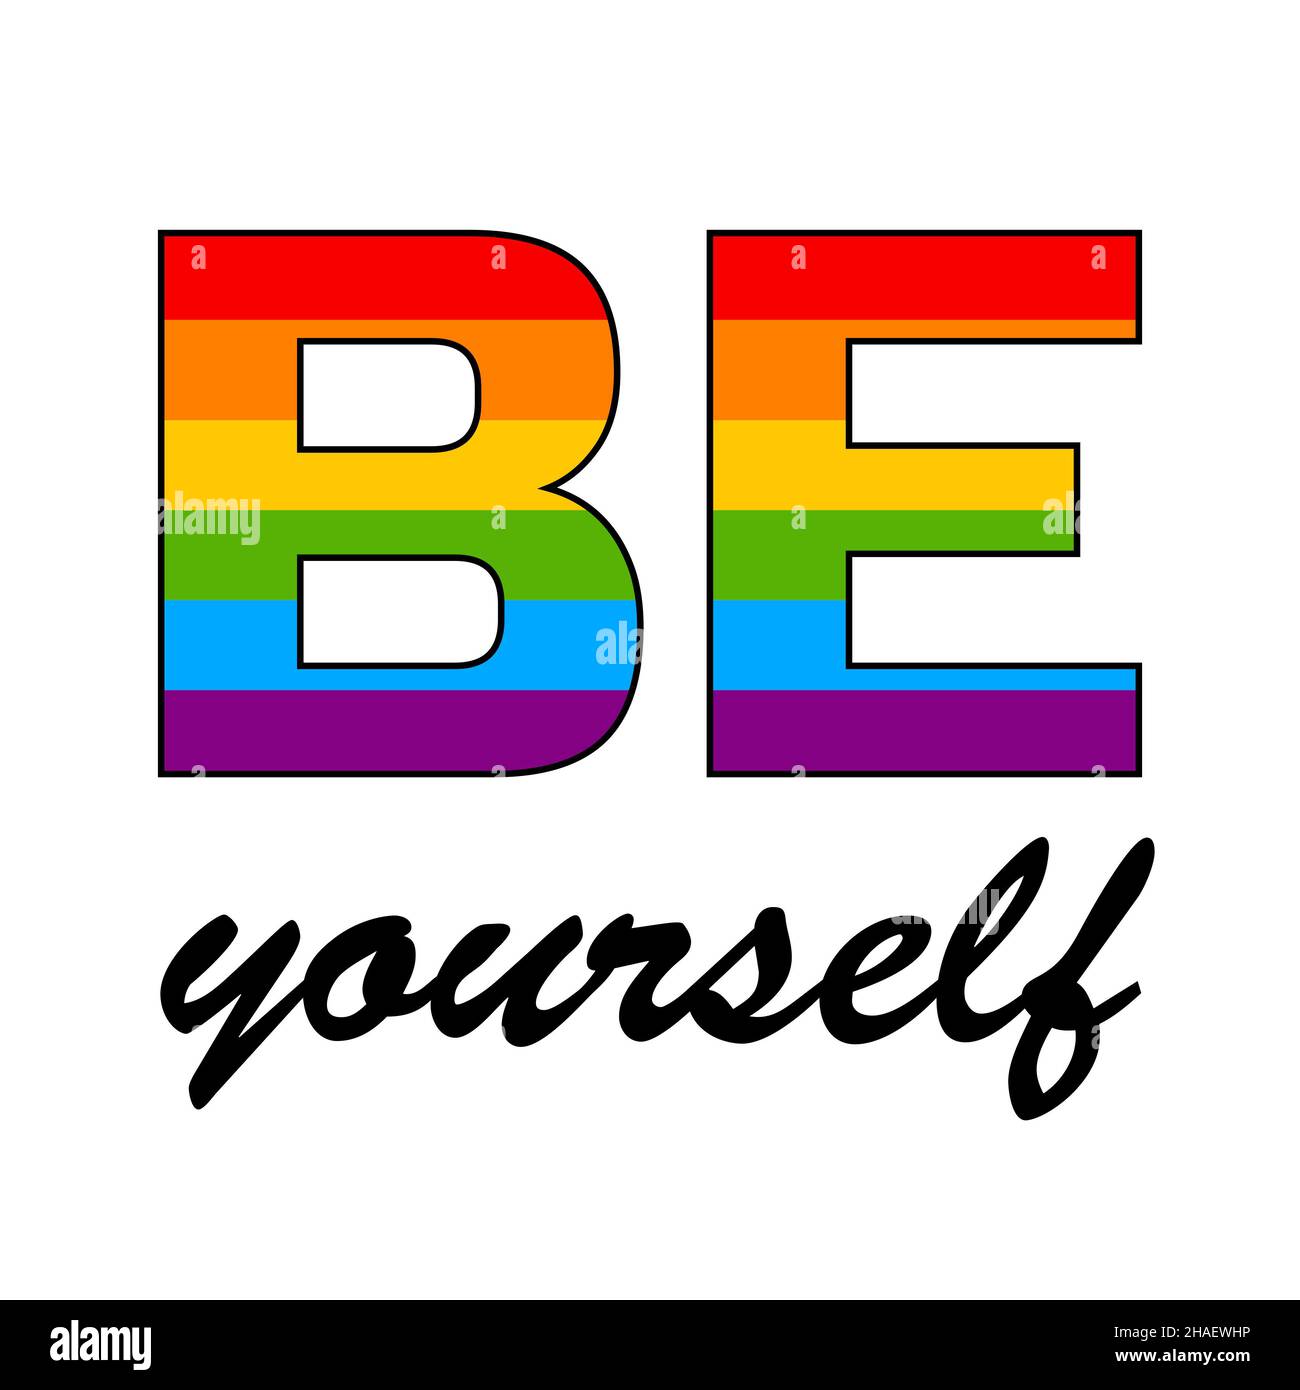 Be yourself quote. LGBT rainbow pride flag. Vector illustration isolated on white Stock Photo